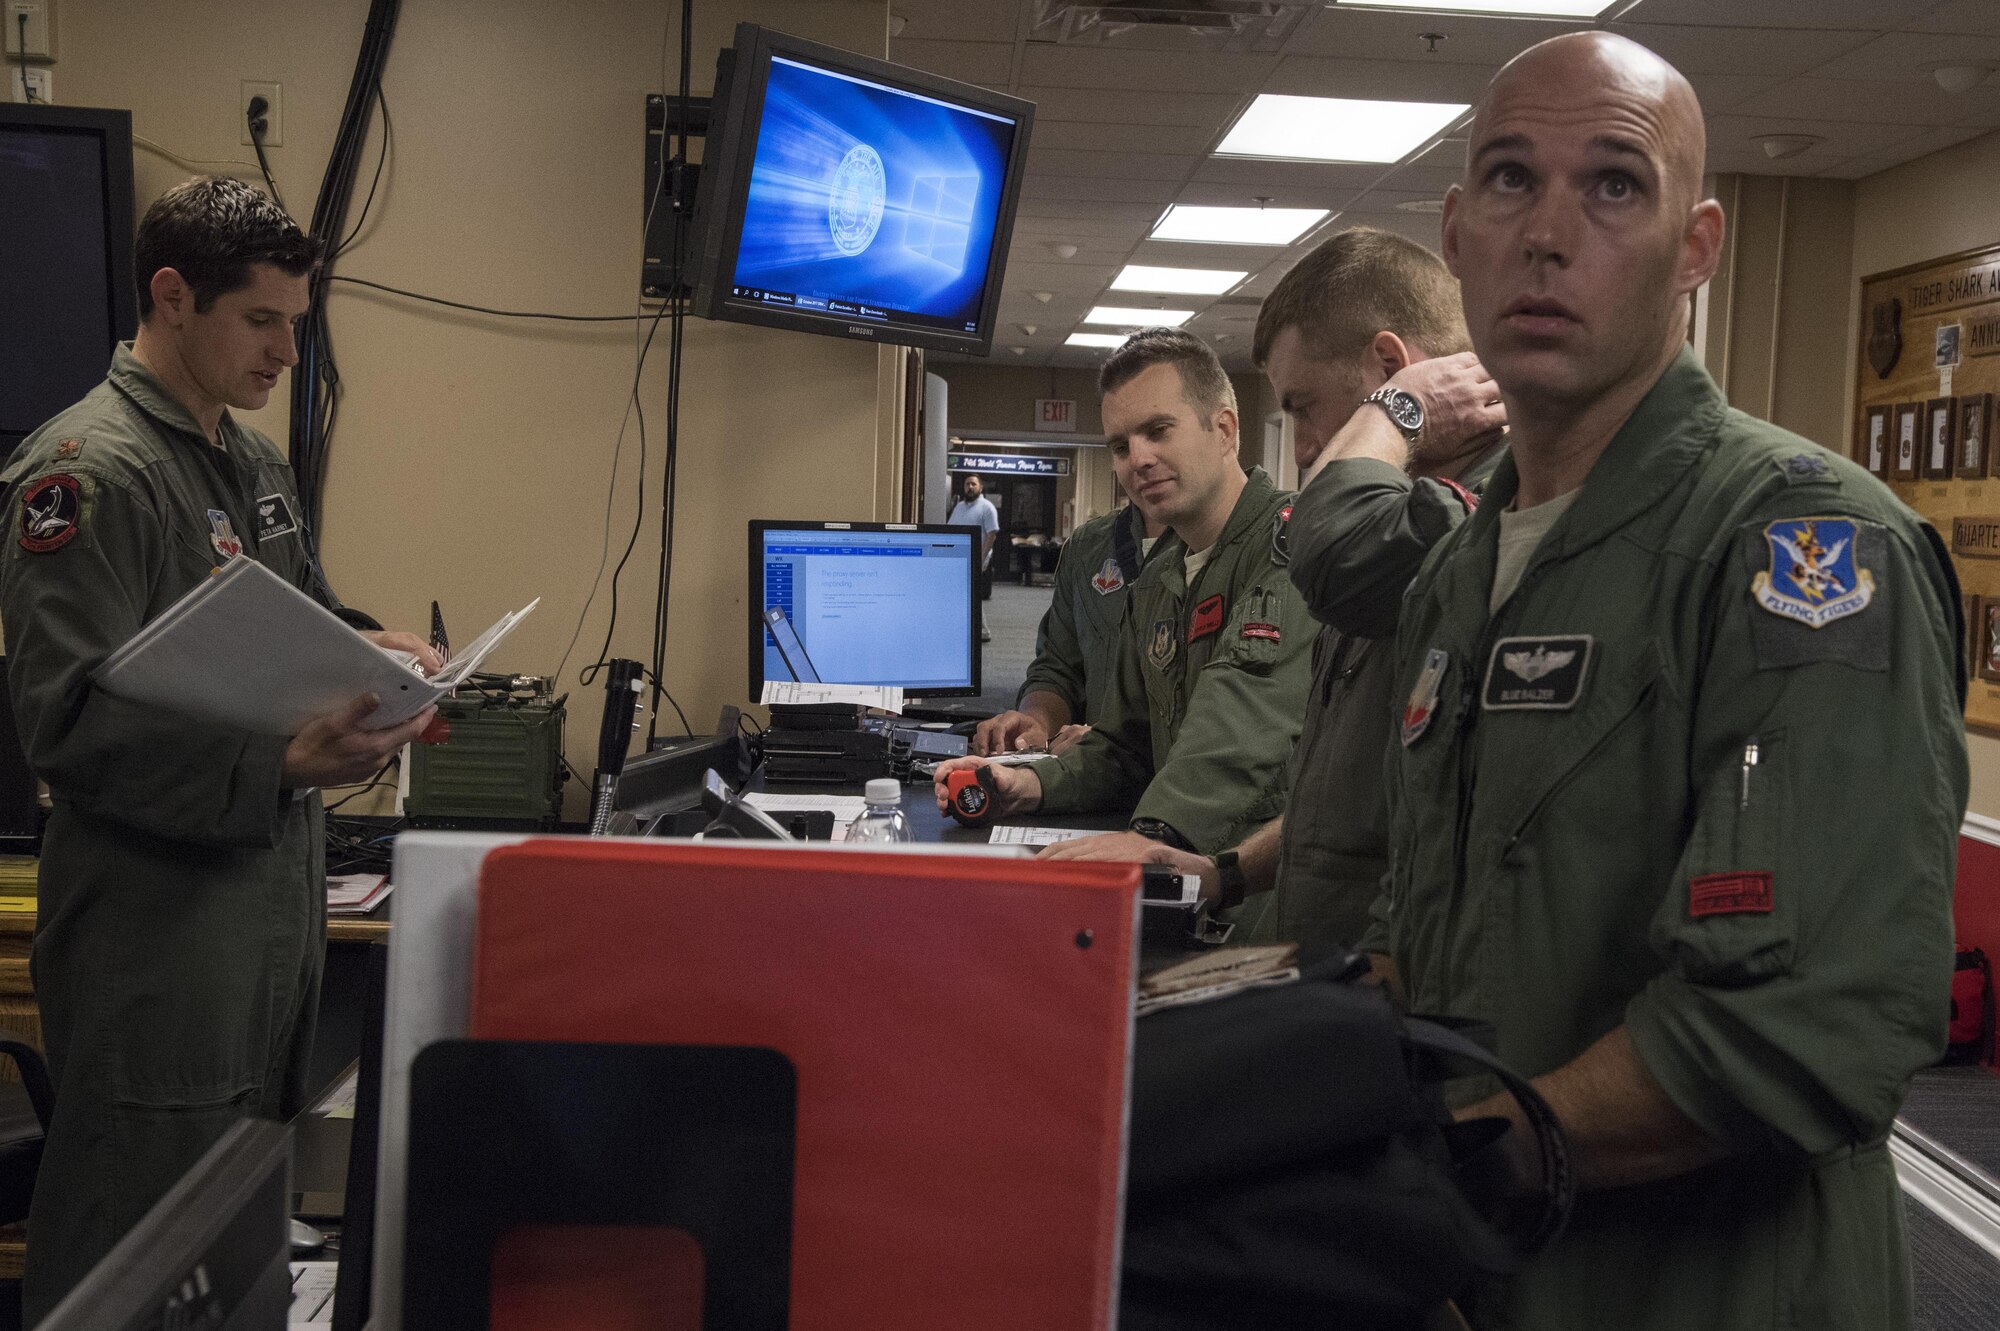 Pilots from the 75th Fighter Squadron receive a pre-departure briefing, Oct. 31, 2017, at Moody Air Force Base, Ga. Pilots, traveled to Eglin AFB, Fla., to participate in exercise COMBAT HAMMER. The exercise evaluates the effectiveness, maintainability, suitability and accuracy of precision guided munitions and high technology air to ground munitions from tactical deliveries against realistic targets with realistic enemy defenses. Moody’s team will be assessed and trained on how accurately and quickly a munition is built, loaded onto the aircraft and dropped from the aircraft onto a target. (U.S. Air Force photo by Senior Airman Janiqua P. Robinson)